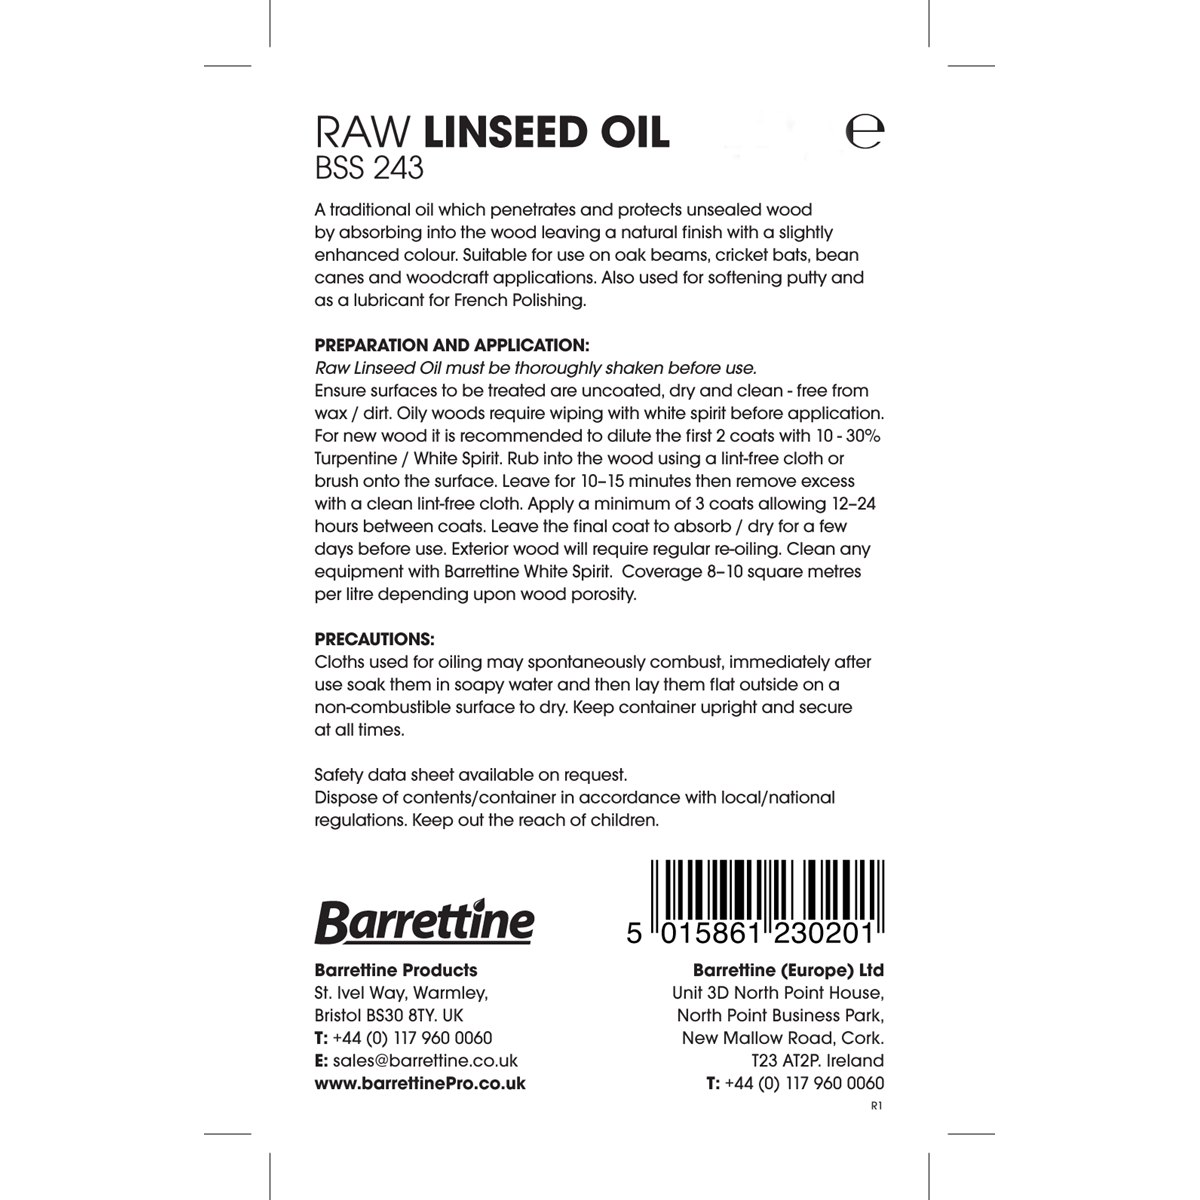 Barrettine Woodcare Raw Linseed Oil Usage Instructions